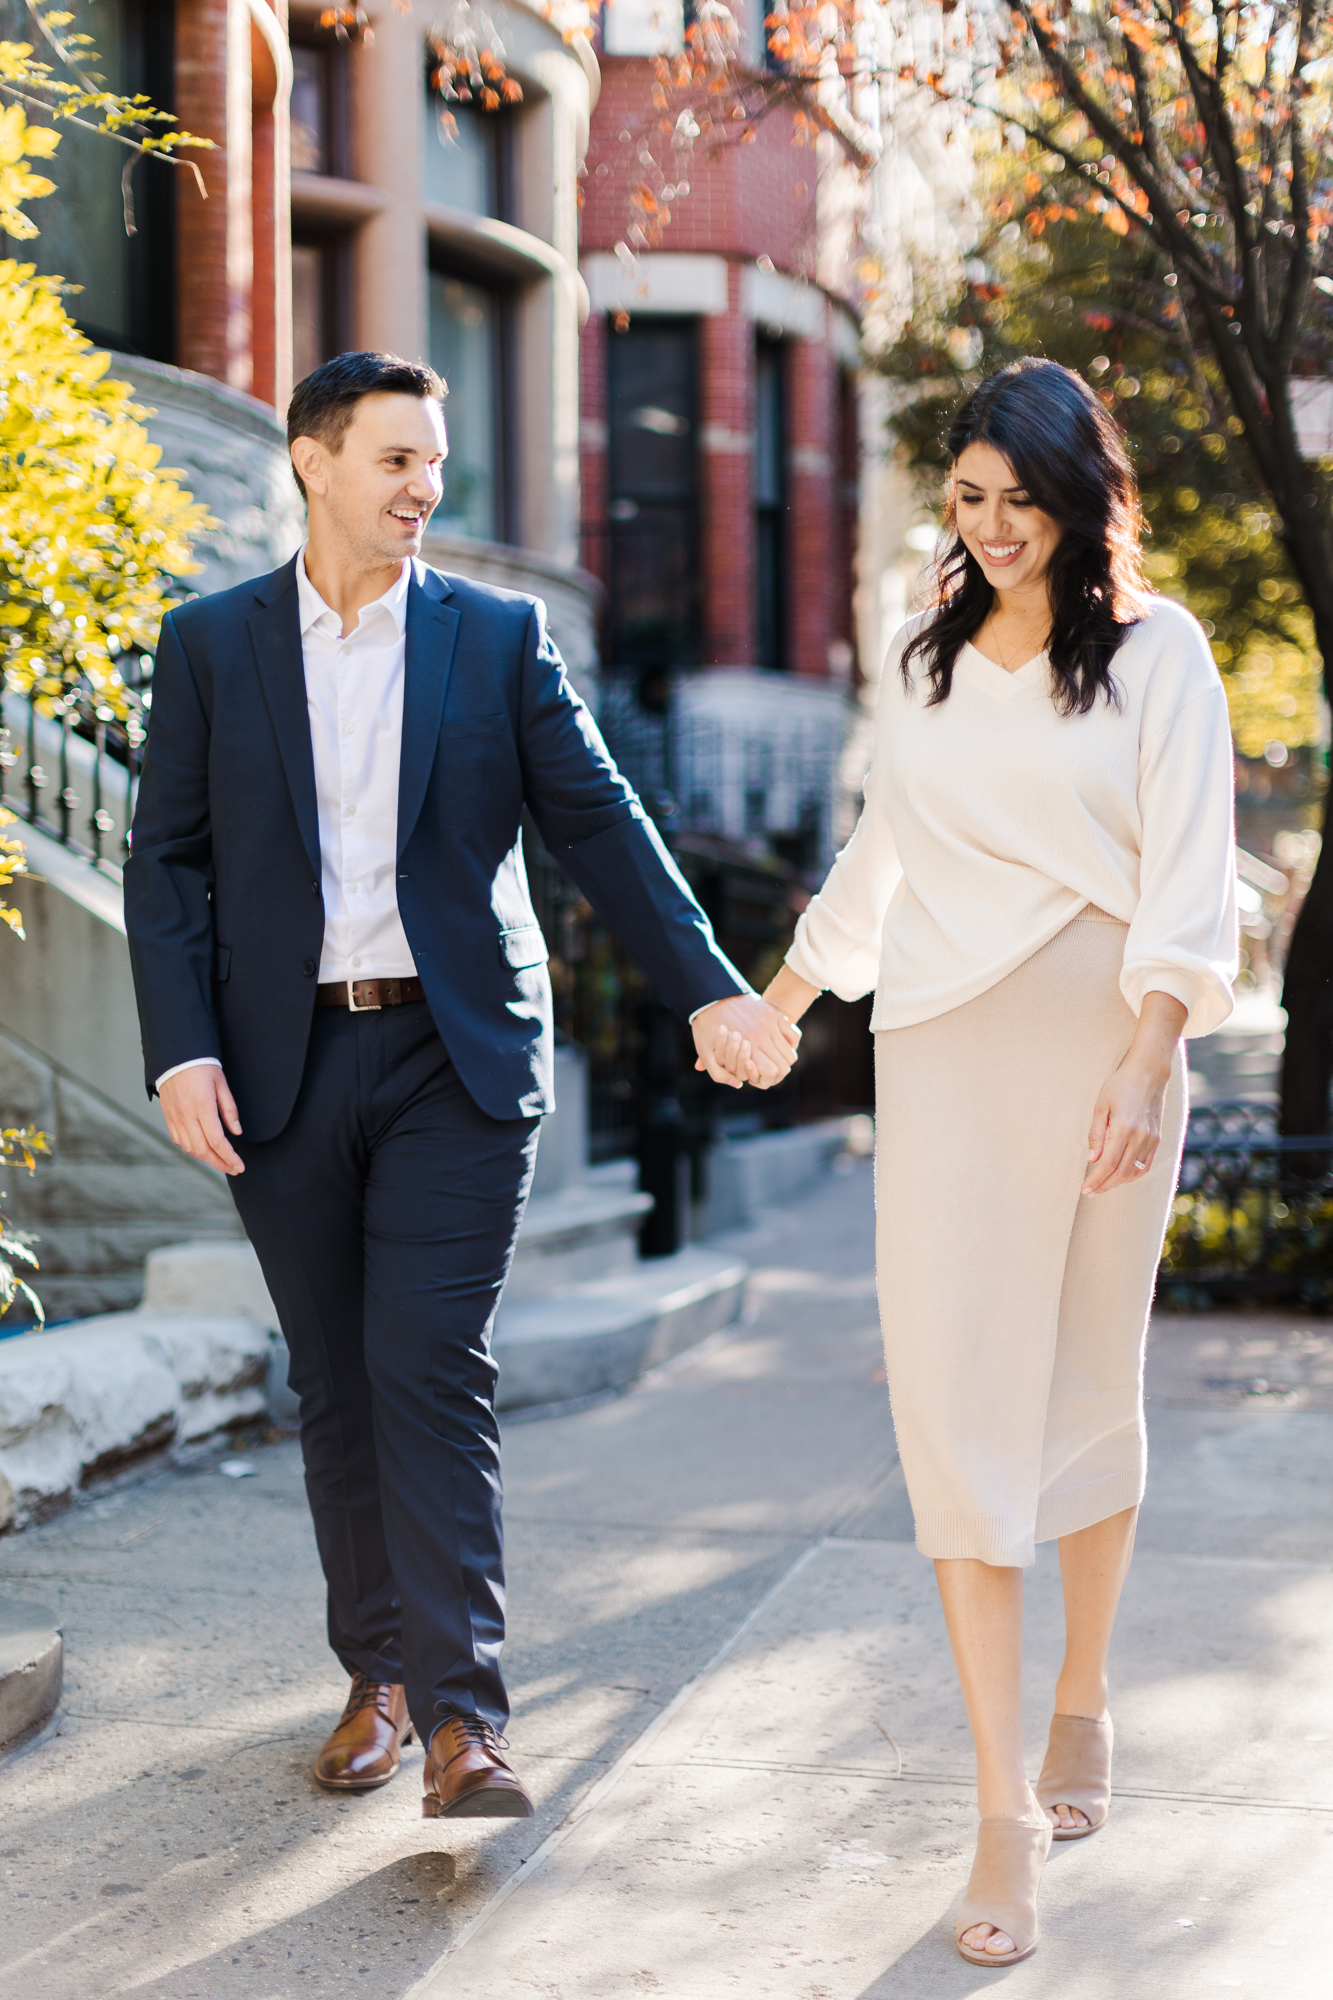 Whimsical Upper West Side Engagement Photo Shoot in NYC